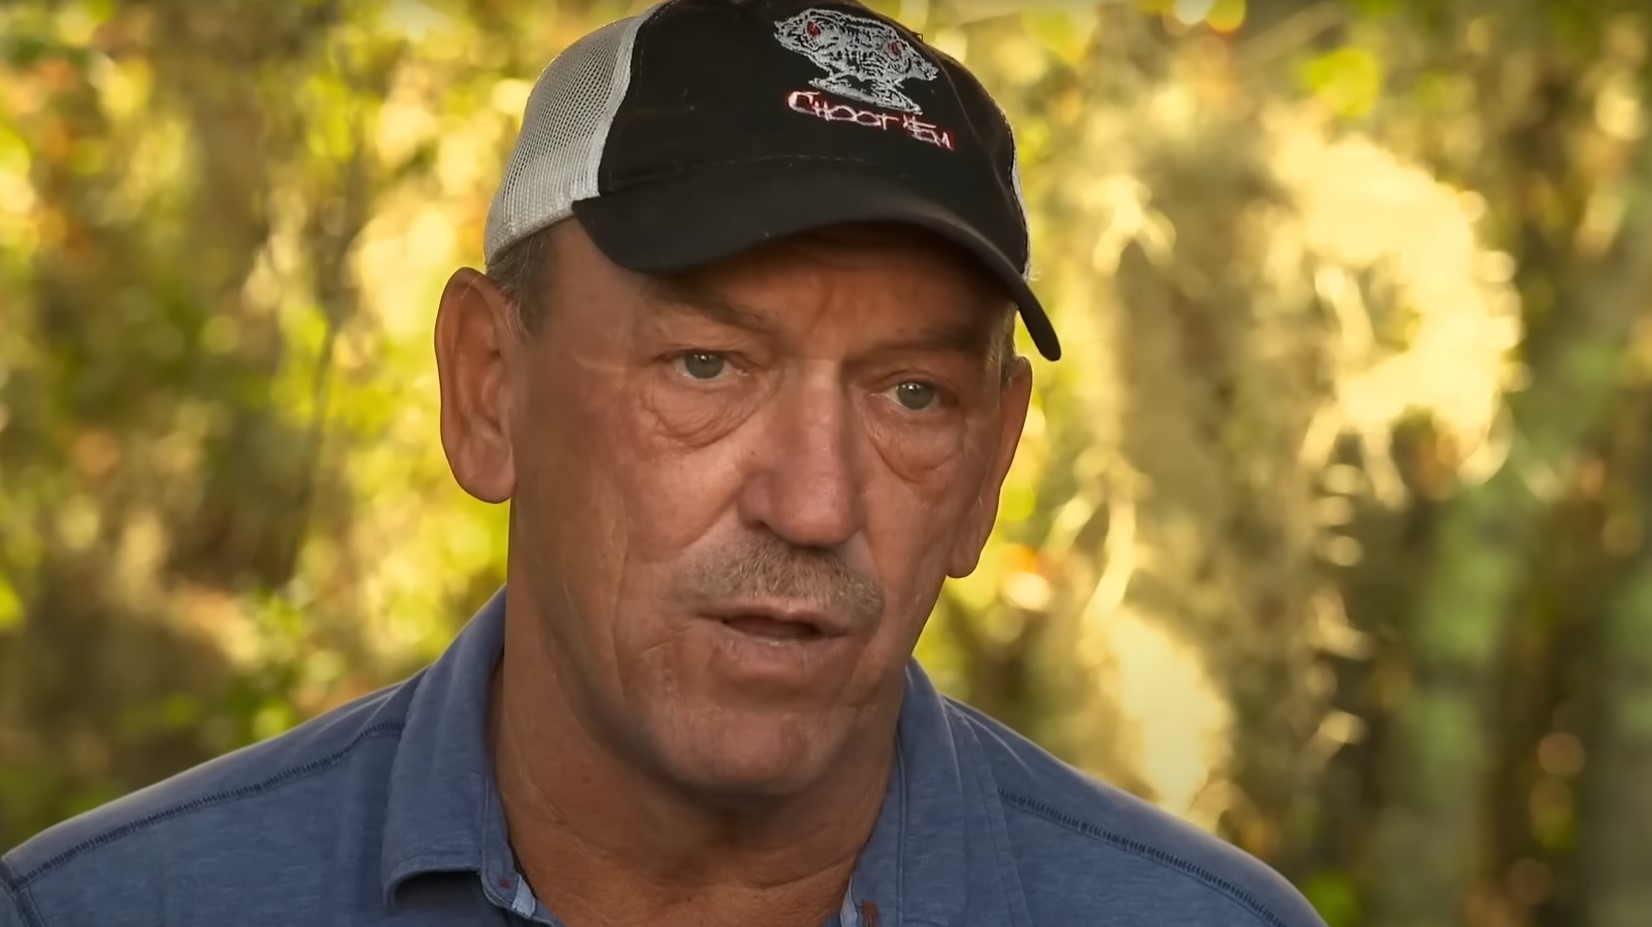 Is Swamp People Scripted or Real?